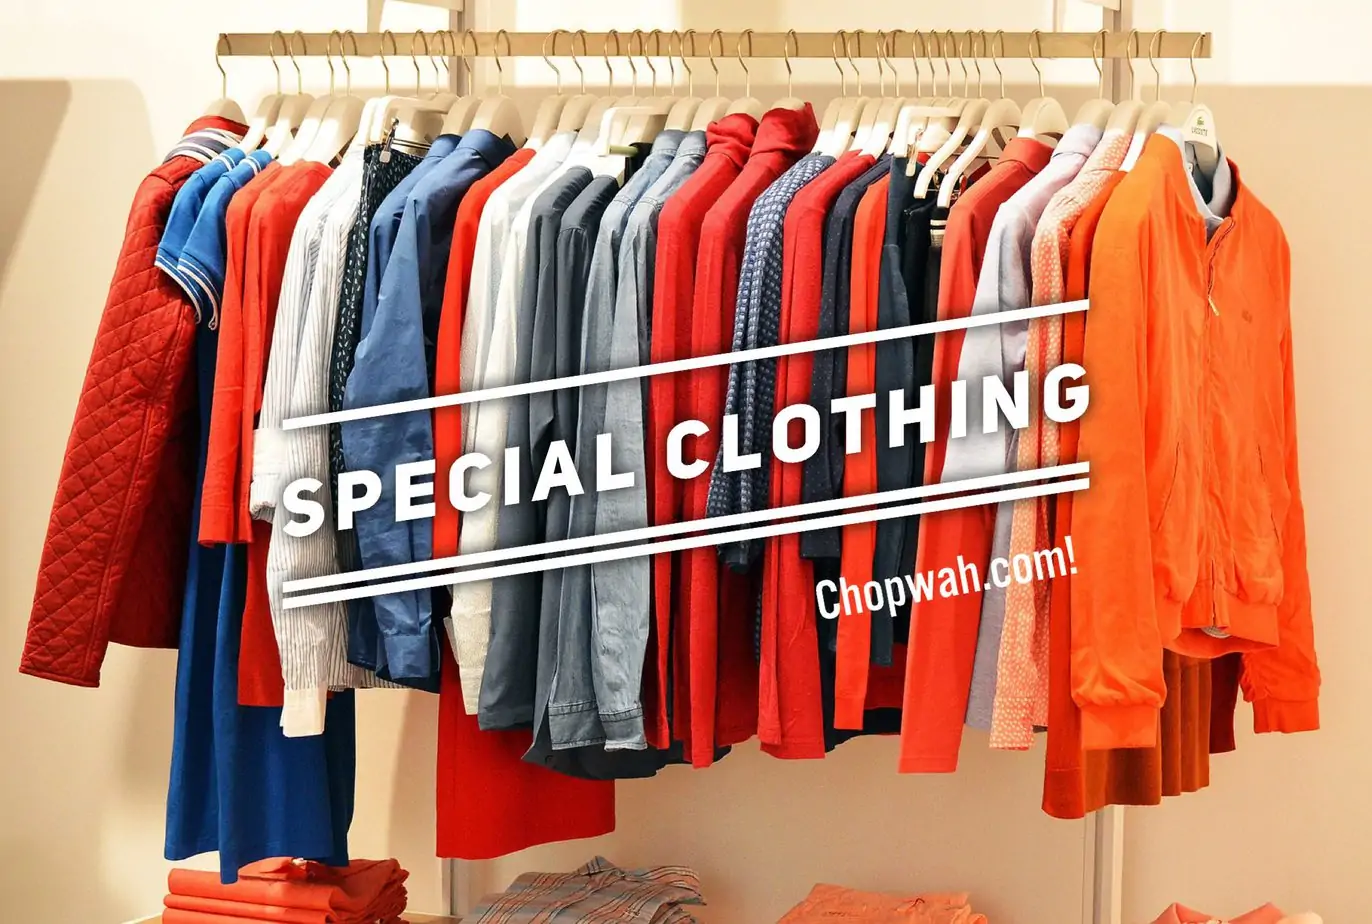 Special clothing